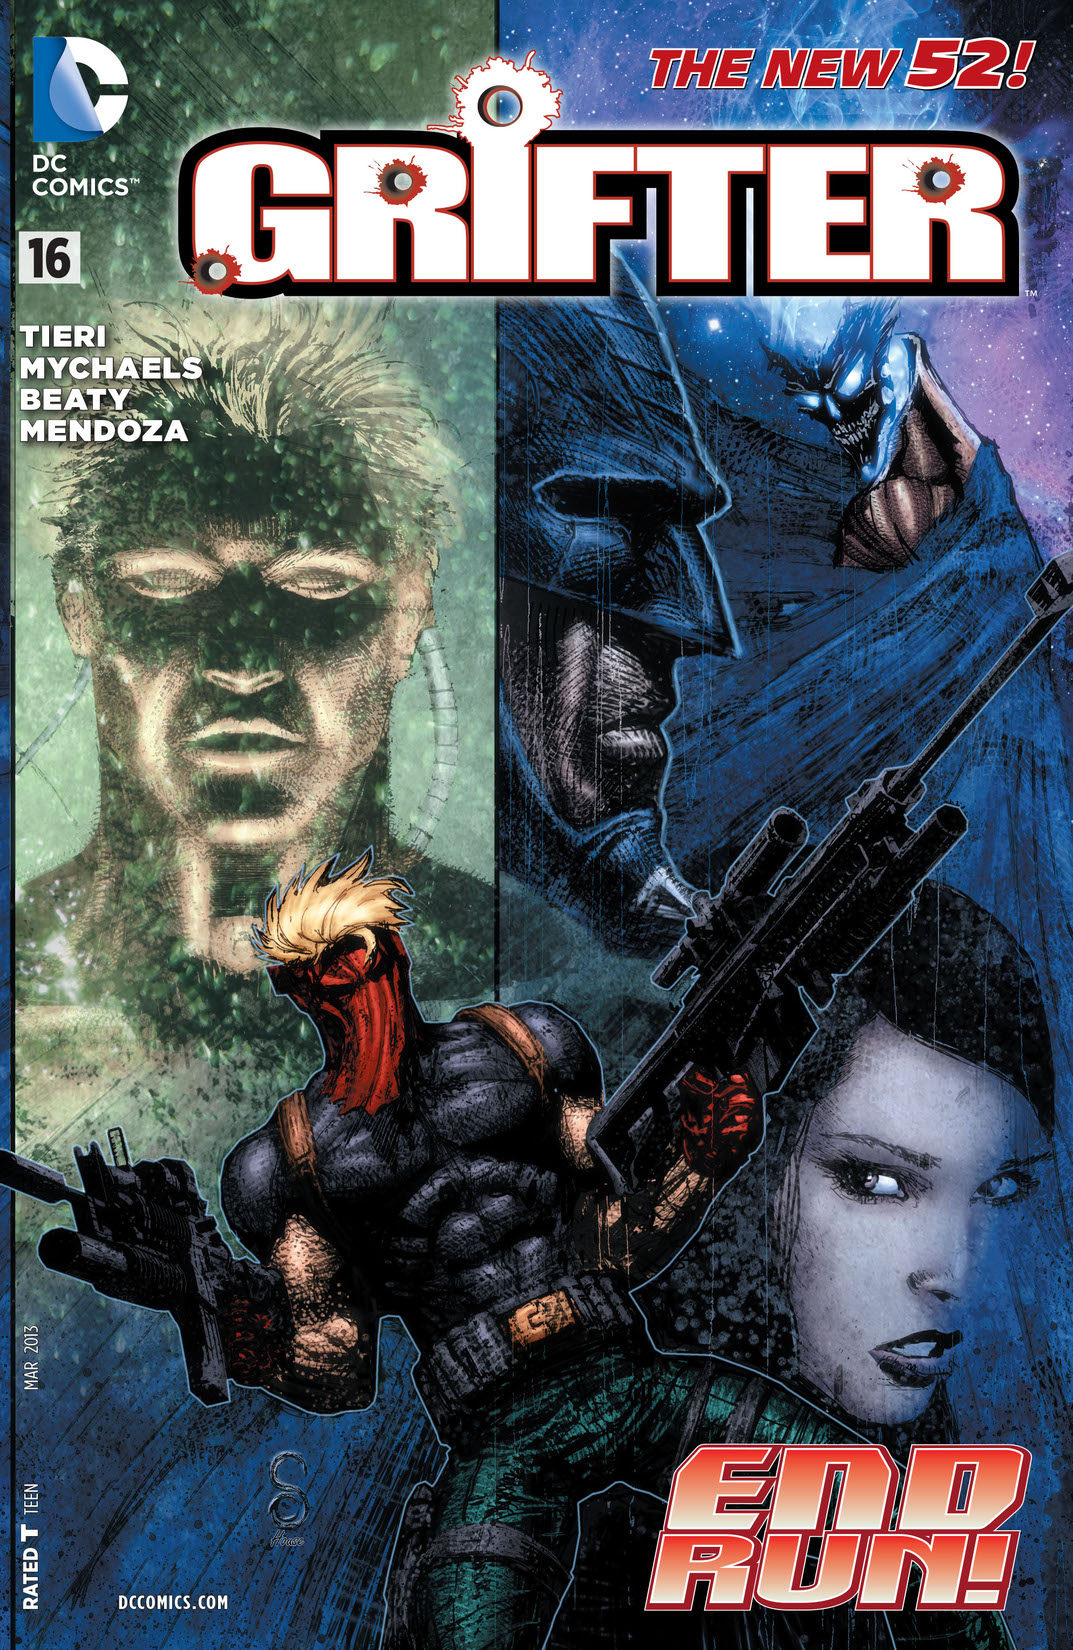 Grifter (2011-) #16 preview images